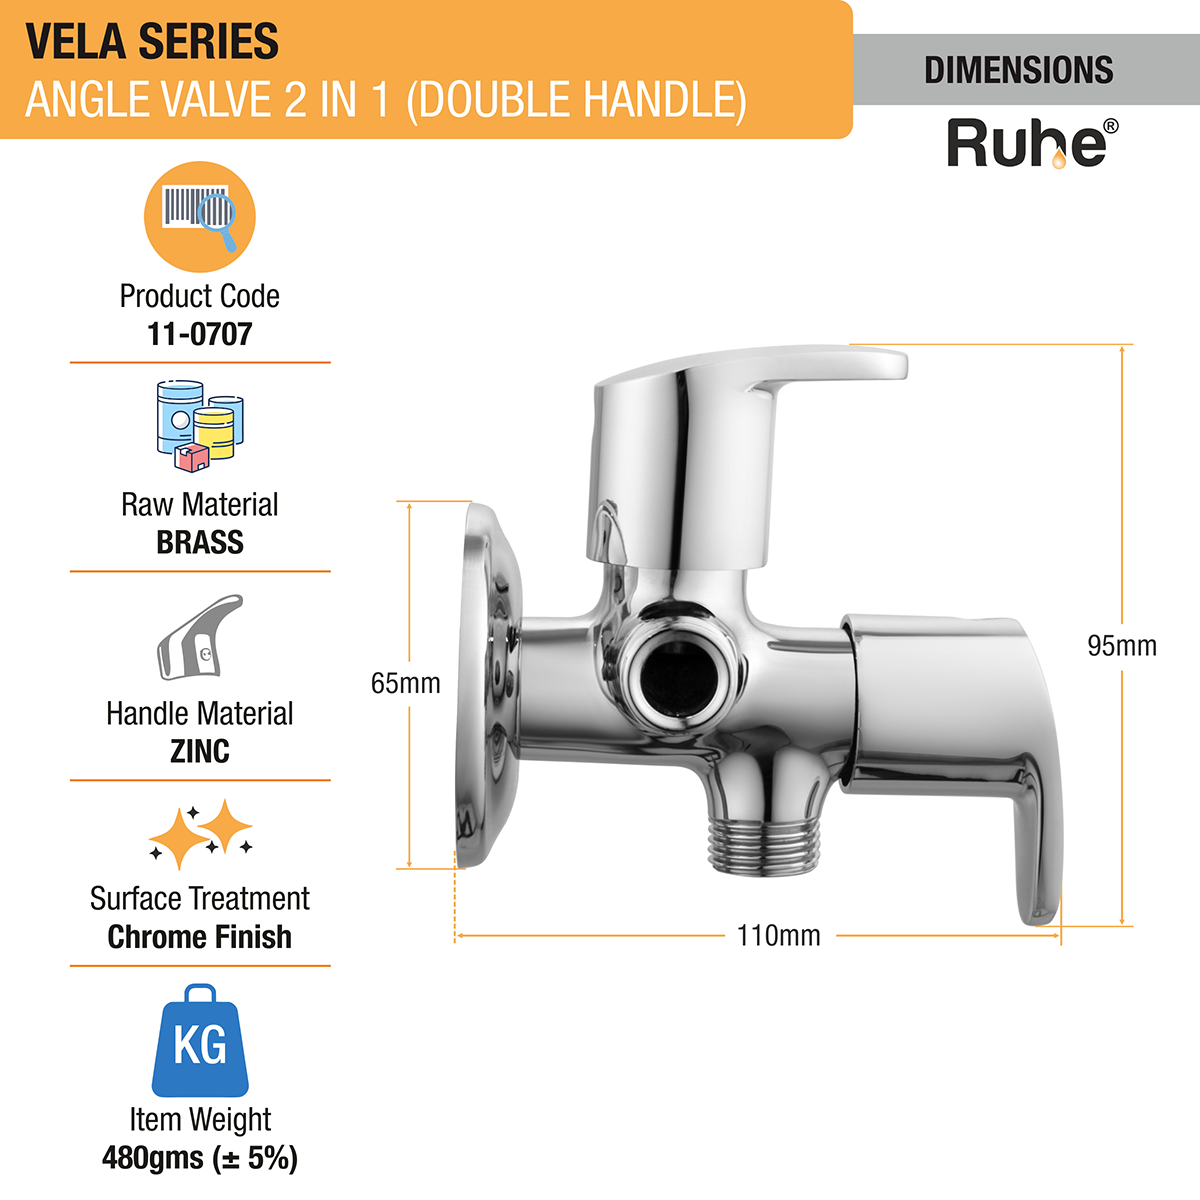 Vela Two Way Angle Valve Brass Faucet (Double Handle) dimensions and size